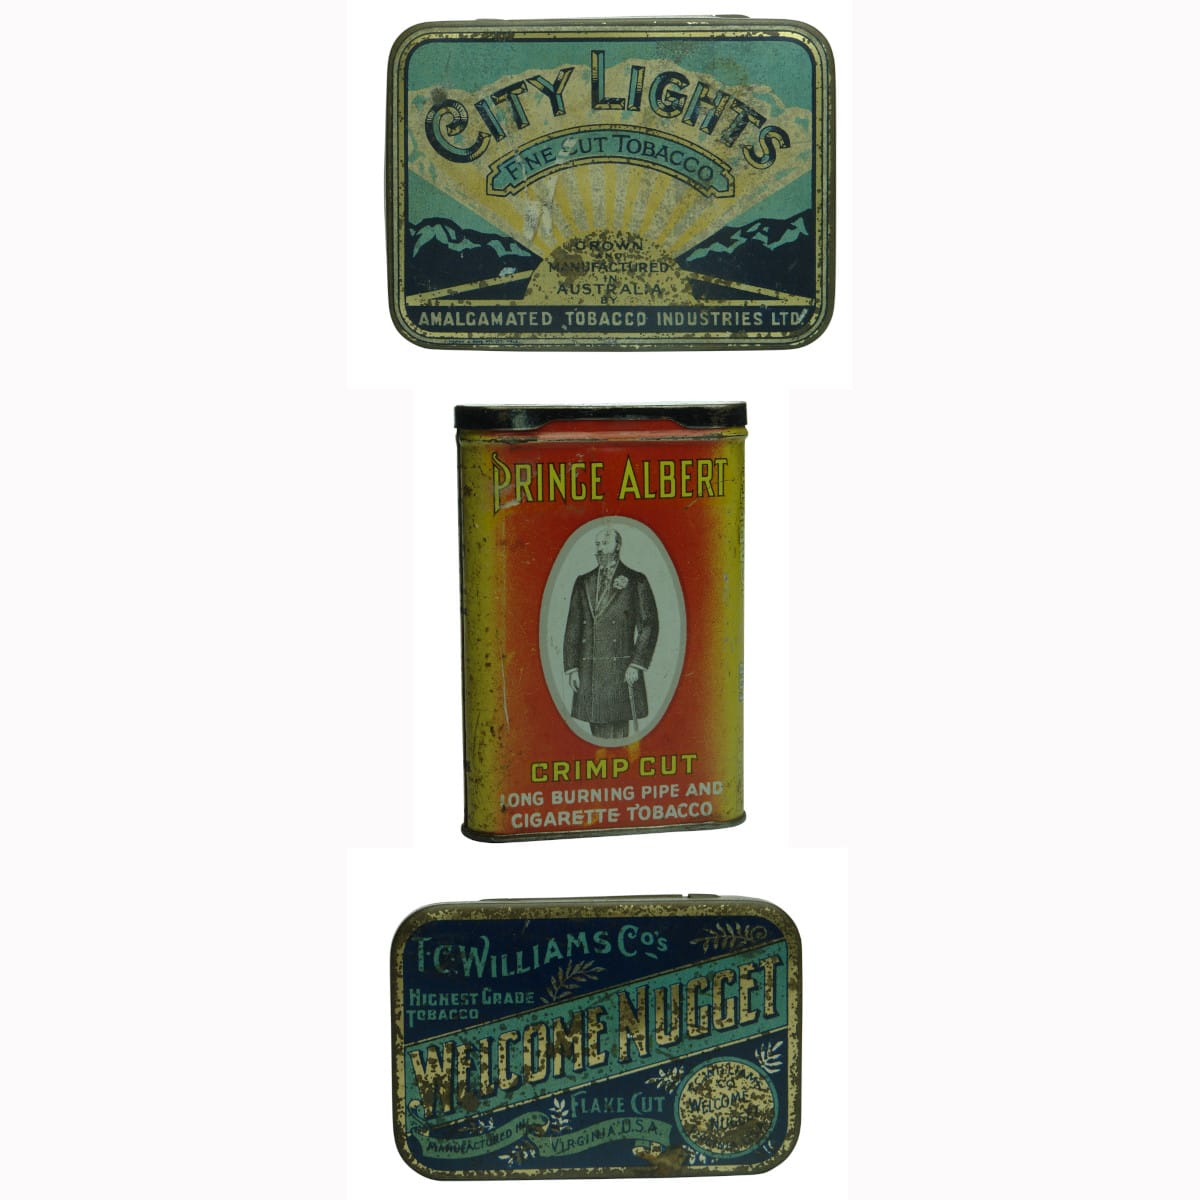 Three Tobacco Tins: City Lights, Melbourne; Prince Albert; Williams Welcome Nugget.